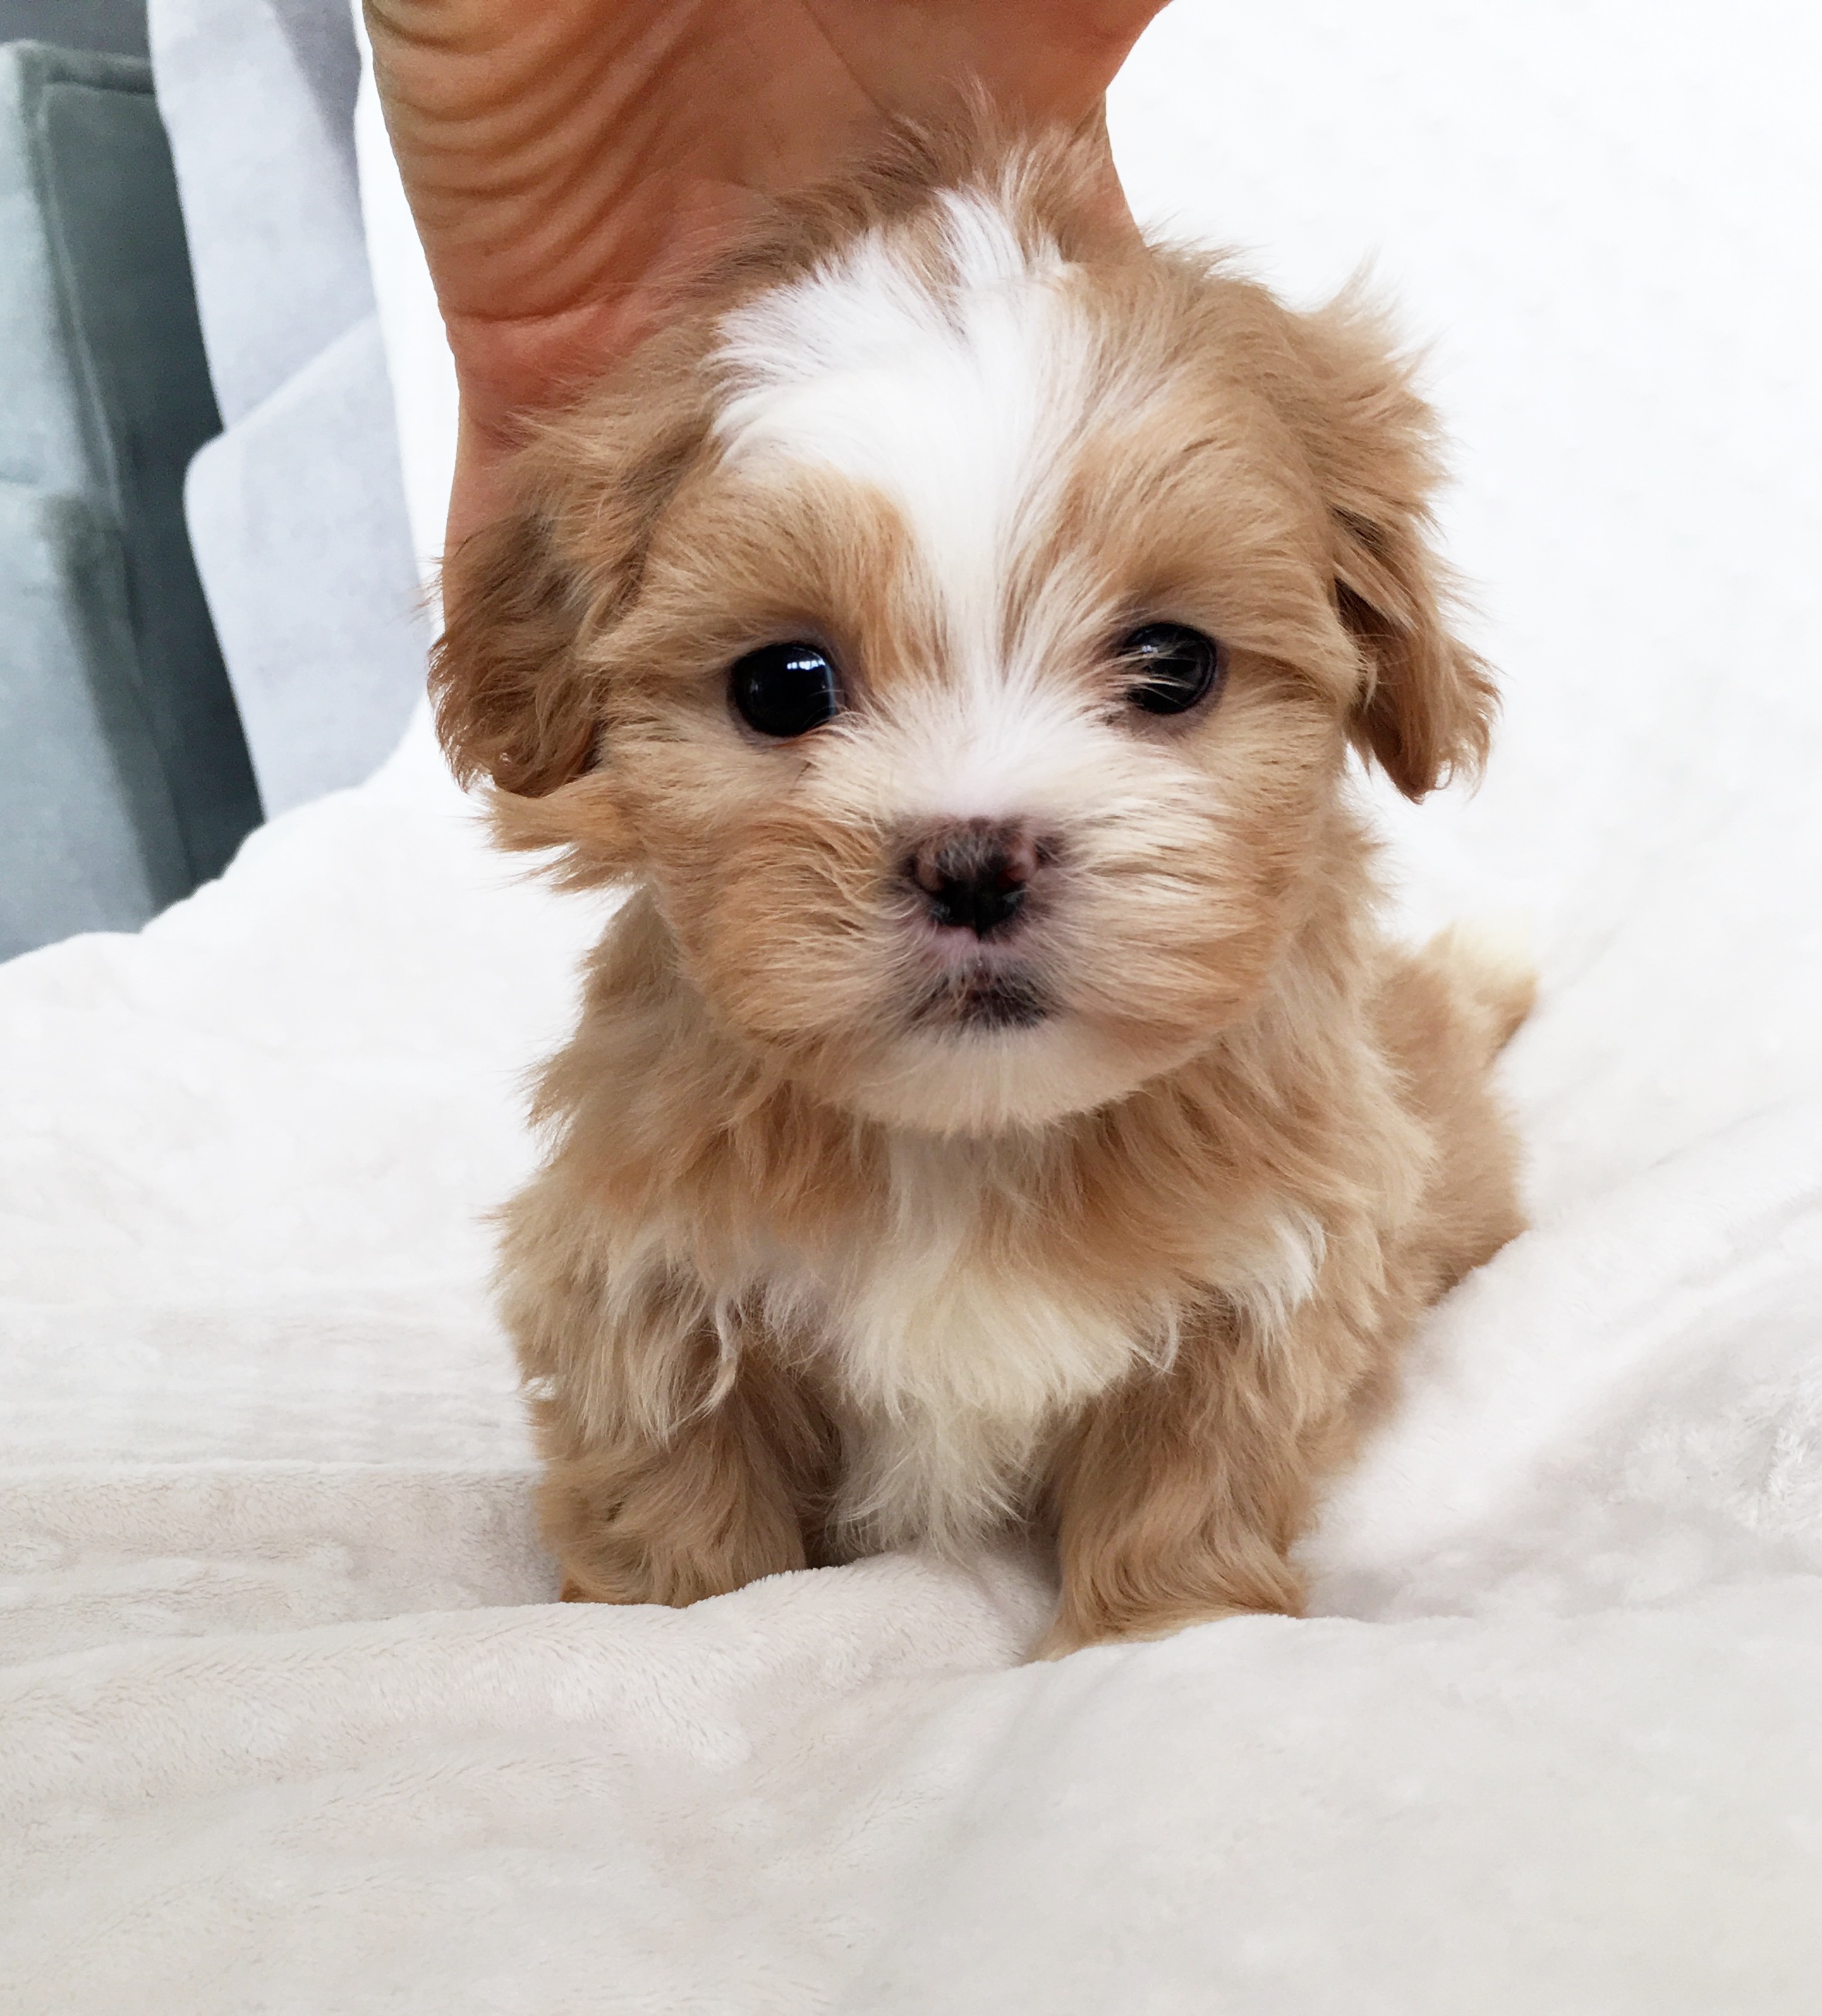 Adorable Morkie Puppy for sale! | iHeartTeacups